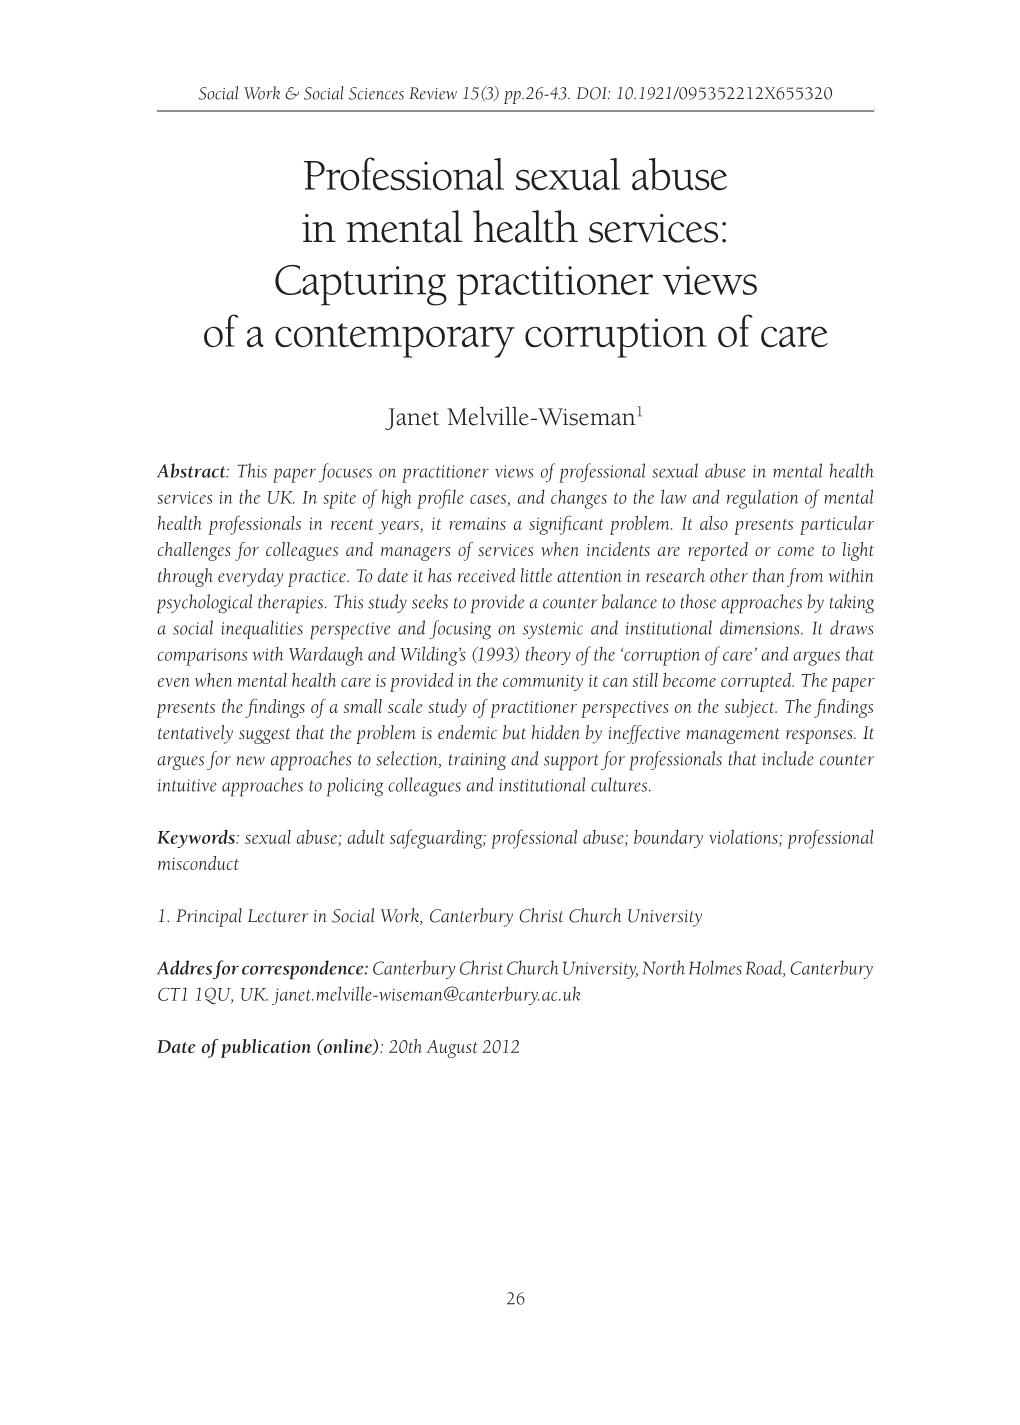 Professional Sexual Abuse in Mental Health Services: Capturing Practitioner Views of a Contemporary Corruption of Care